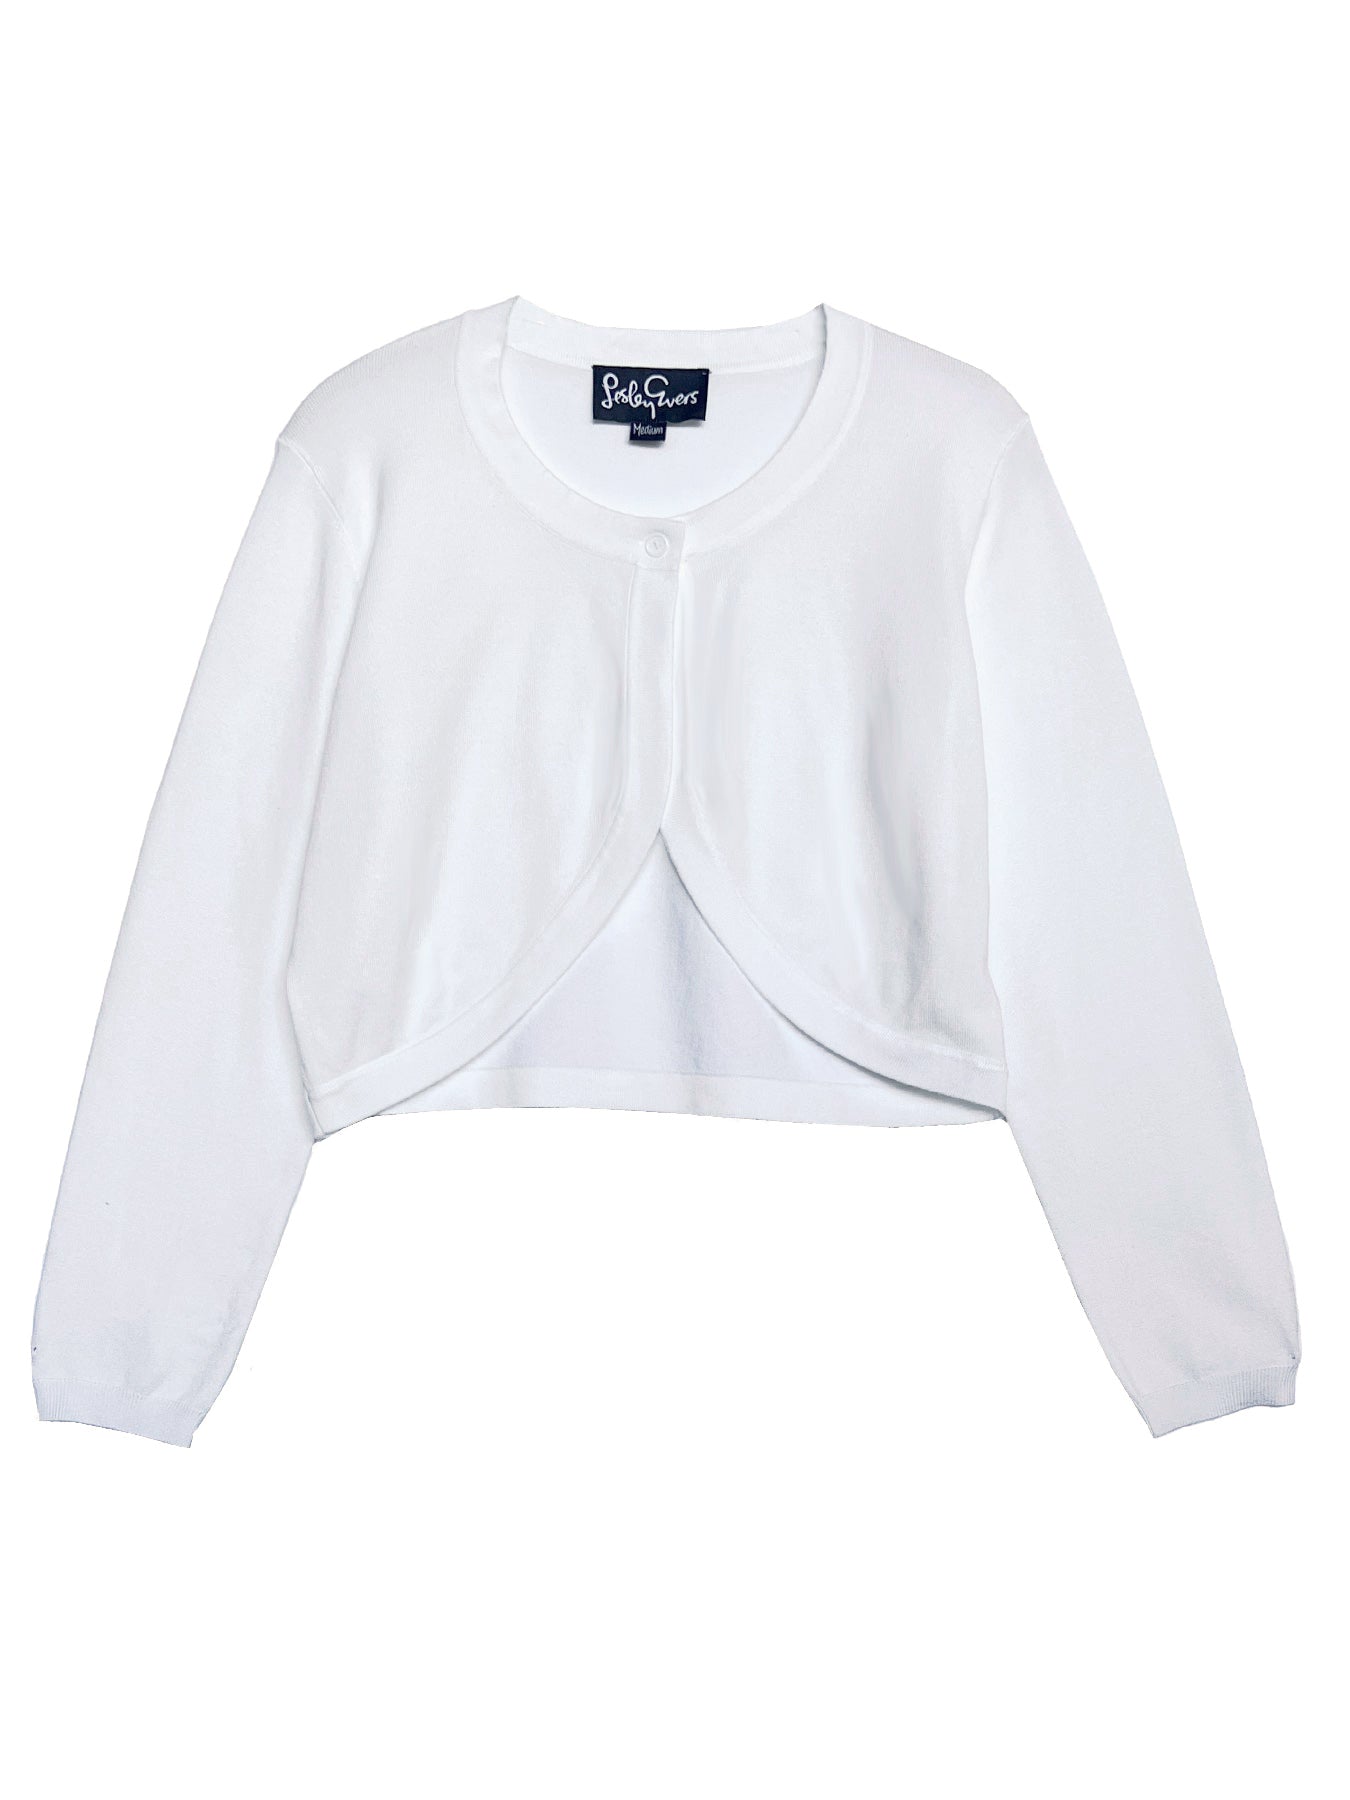 FINLEY shrug White - Lesley Evers - Jacket - Shop - Shop/All Products